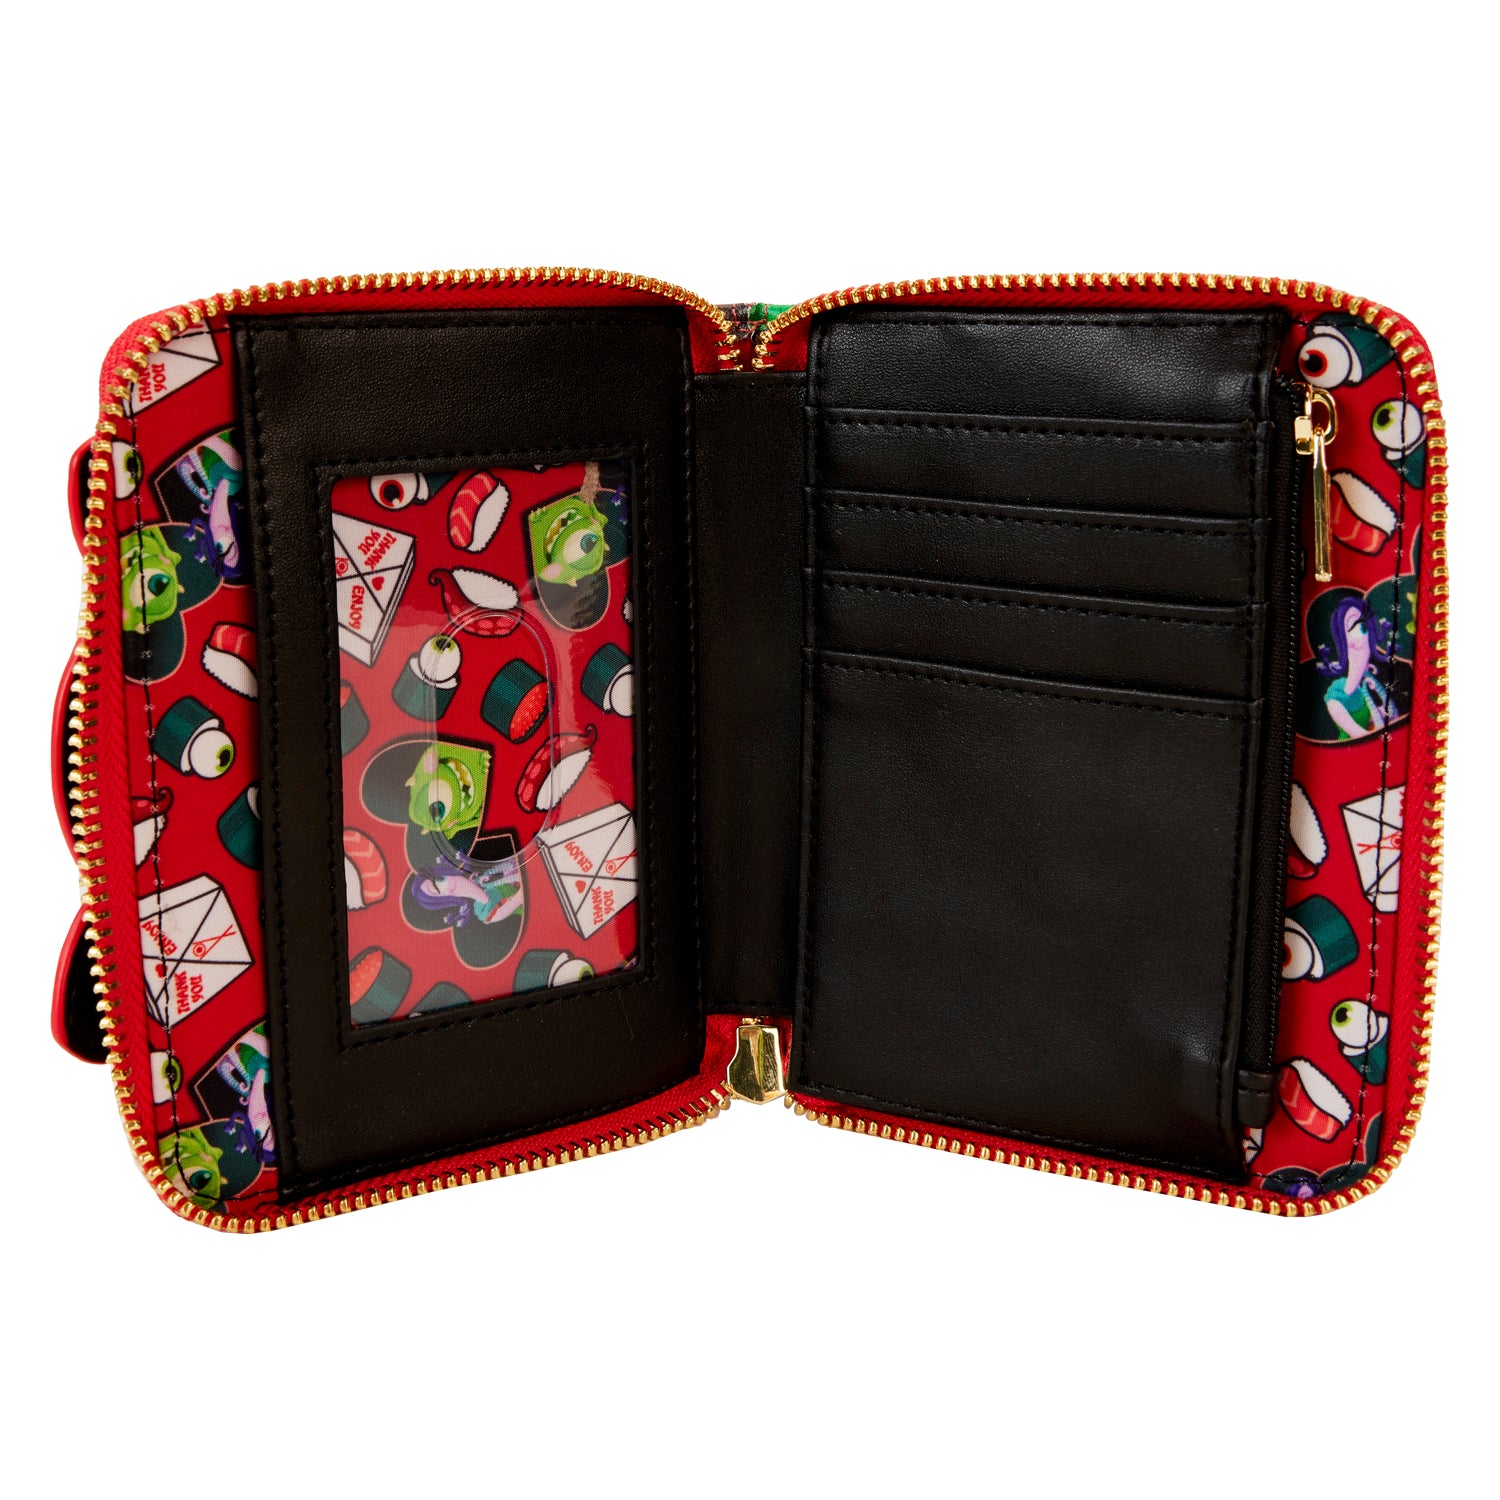 Loungefly Disney Monsters Inc Boo Takeout Zip Wallet